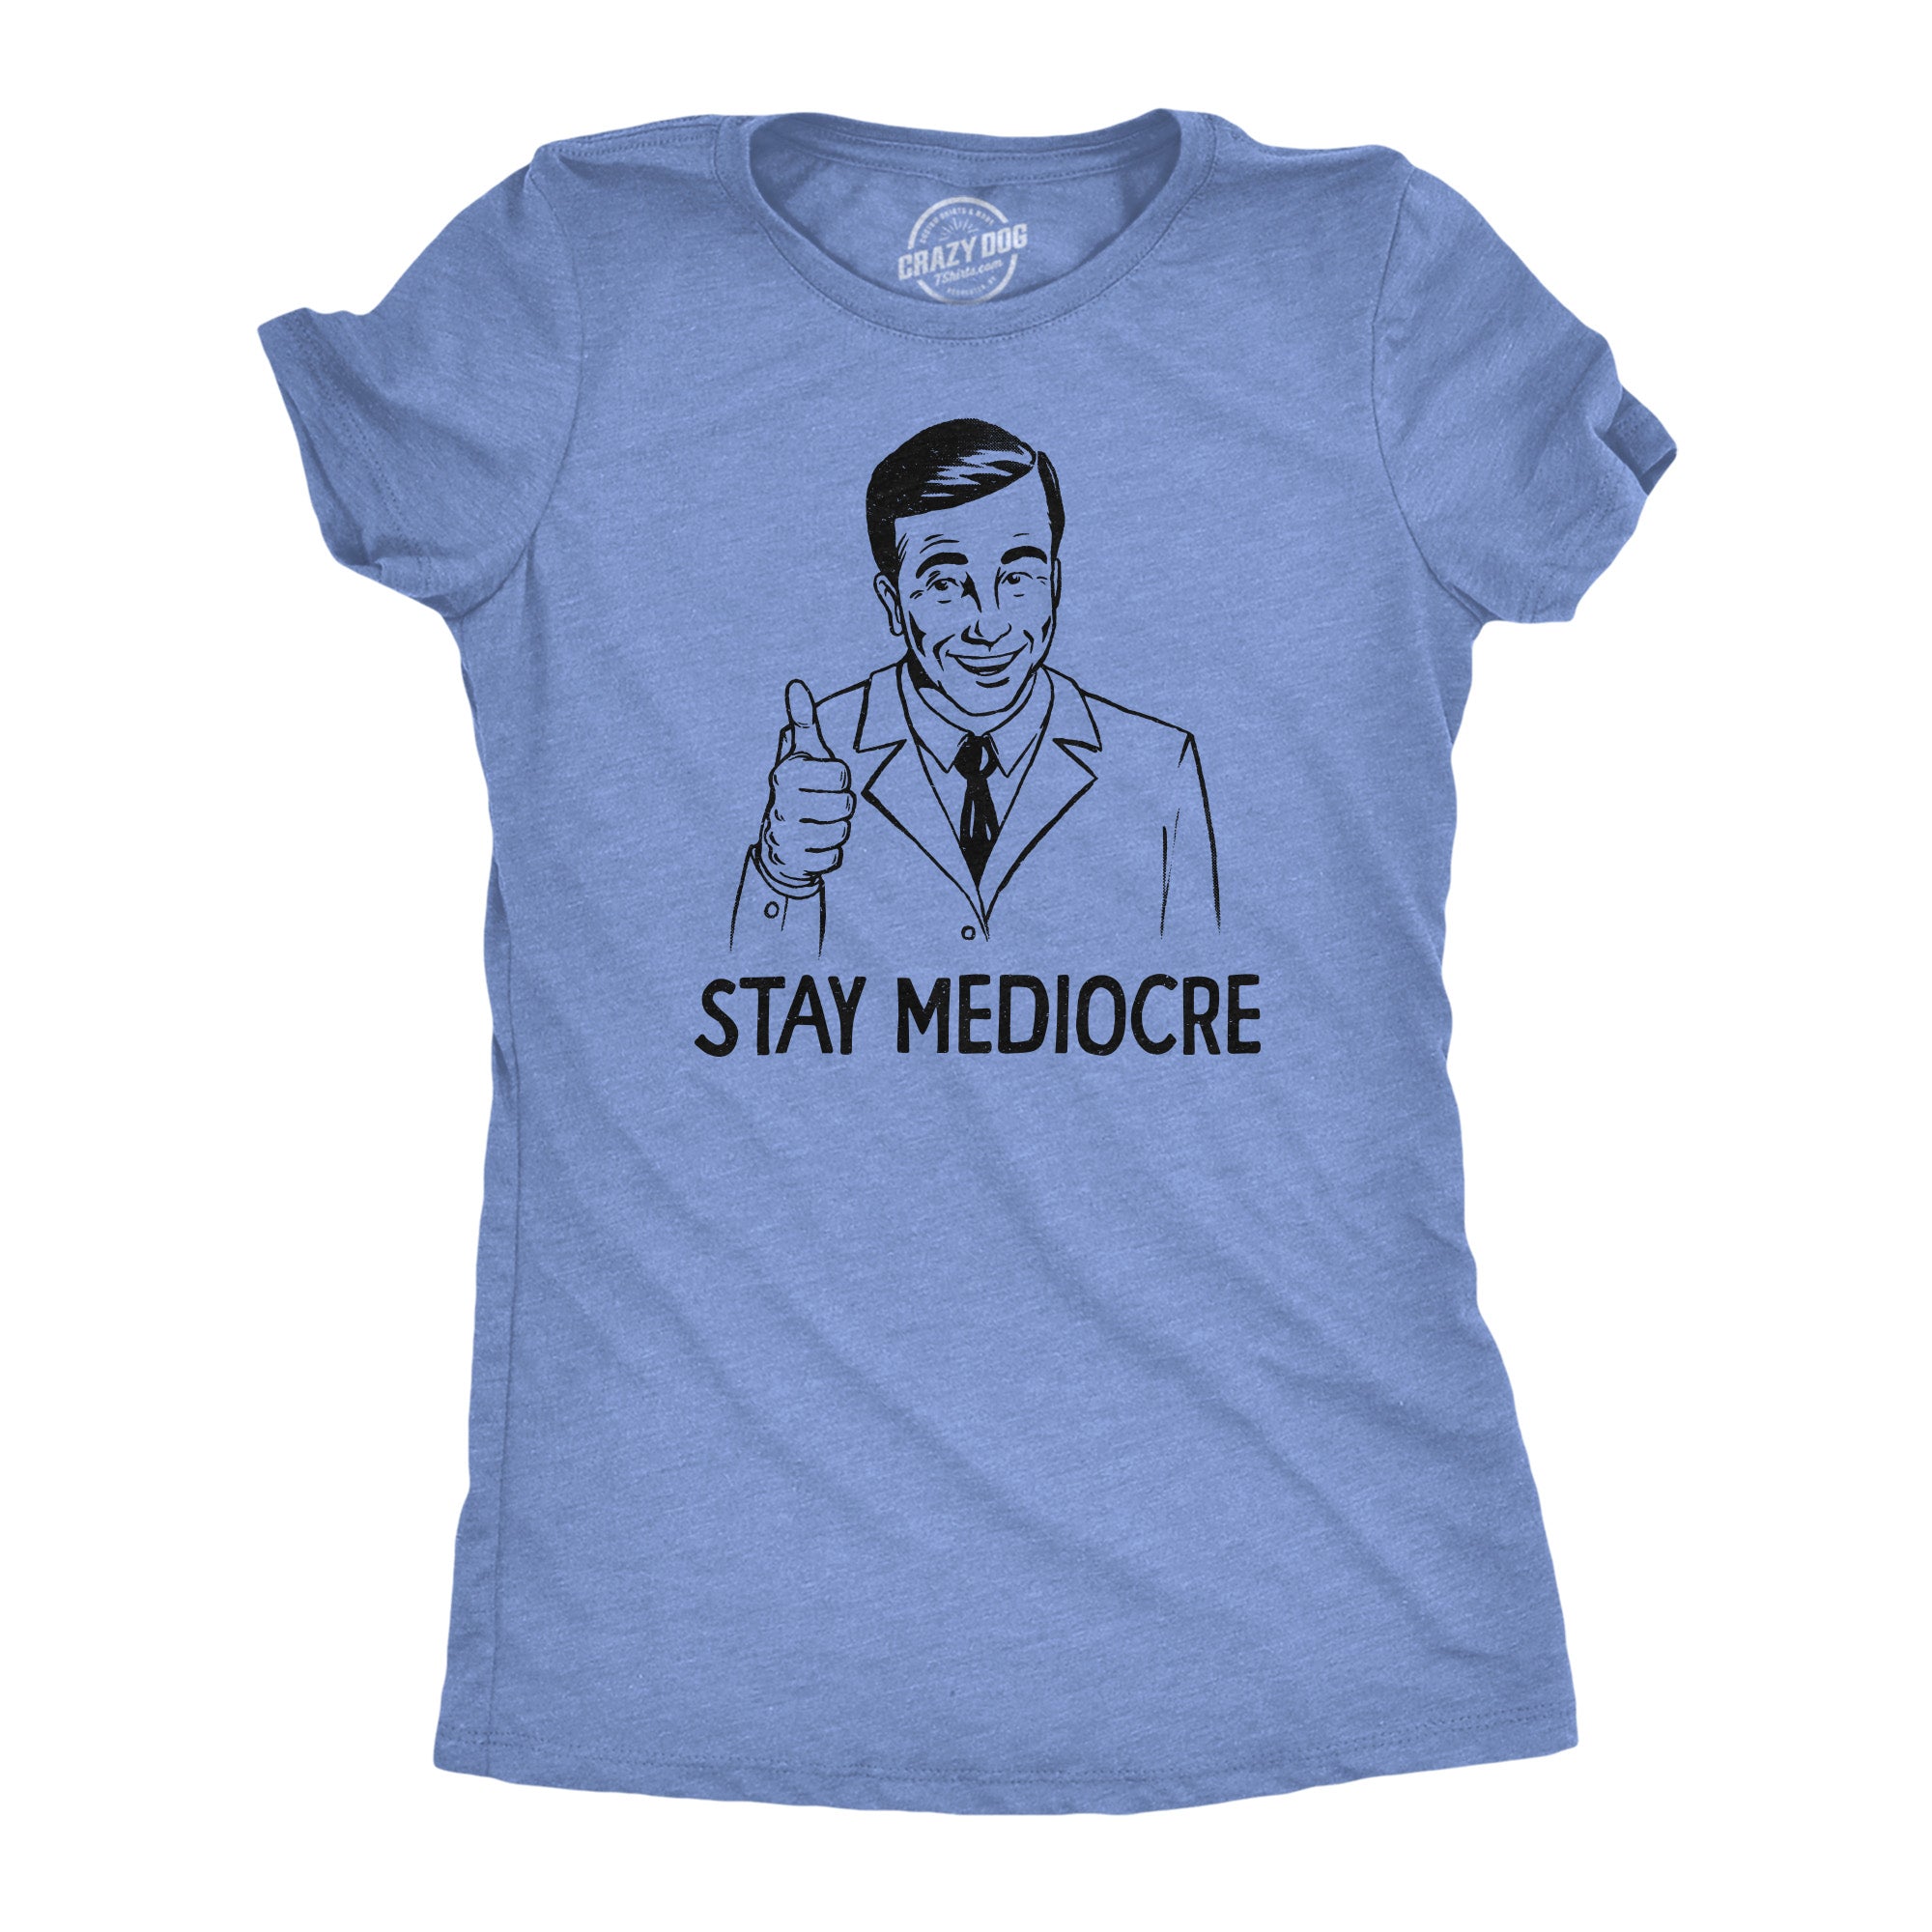 Funny Light Heather blue - MEDIOCRE Stay Mediocre Womens T Shirt Nerdy Sarcastic Tee